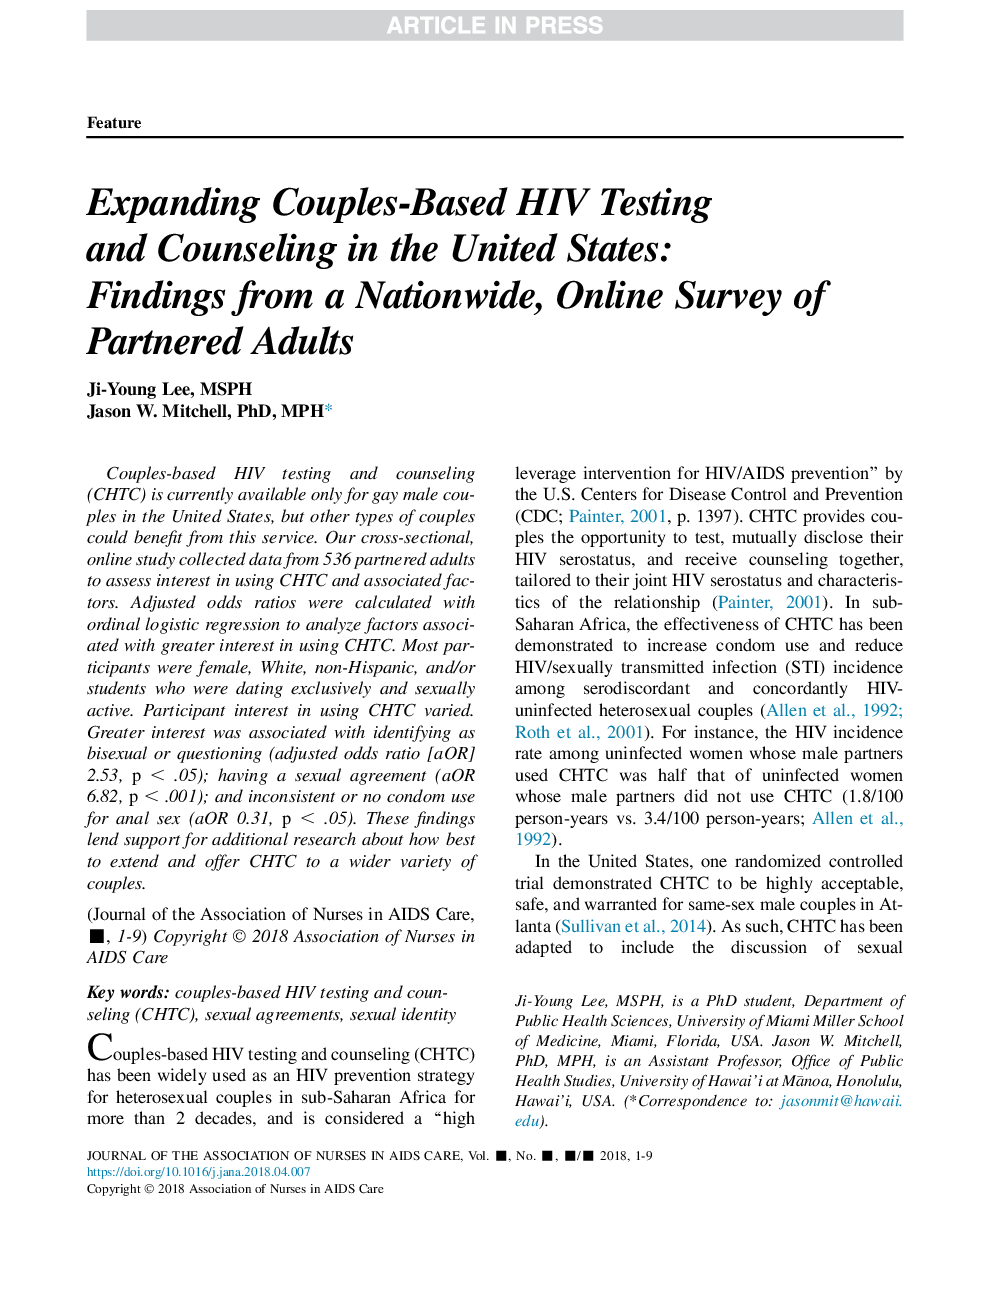 Expanding Couples-Based HIV Testing and Counseling in the United States: Findings from a Nationwide, Online Survey ofÂ Partnered Adults